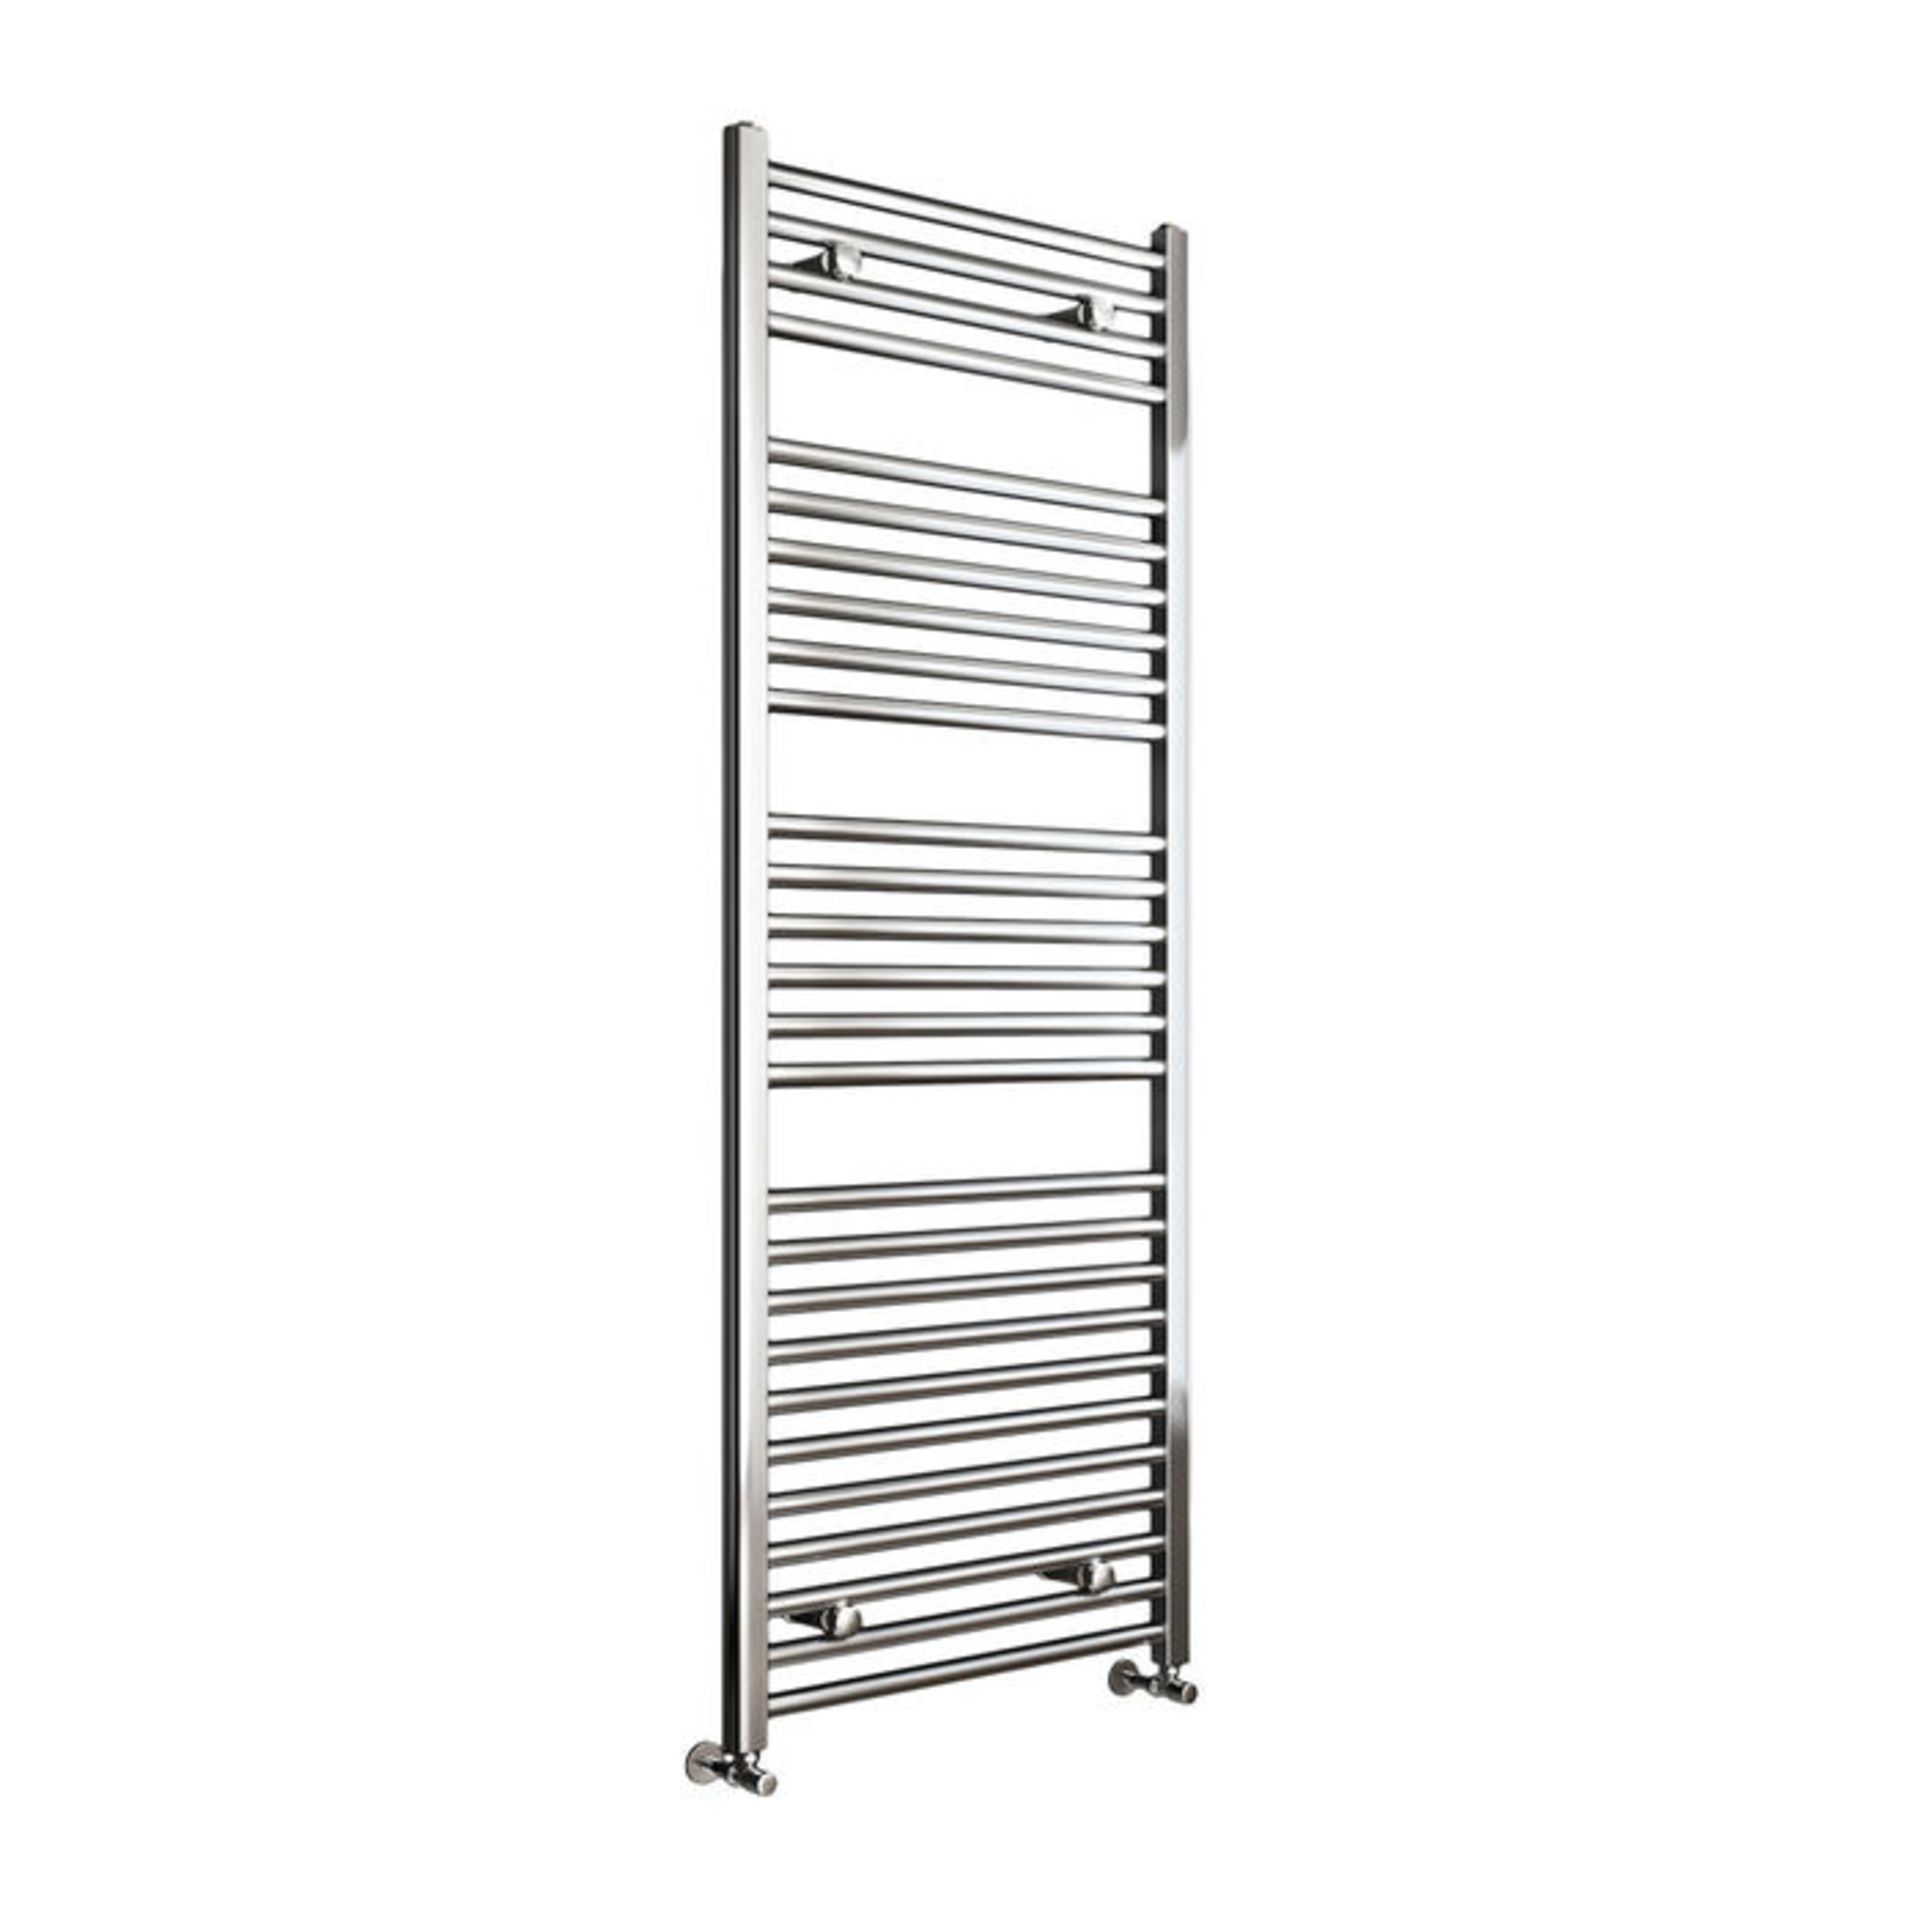 (P121) 1600x600mm -25mm Tubes - Chrome Heated Straight Rail Ladder Towel Radiator. RRP £191.98. This - Image 3 of 3